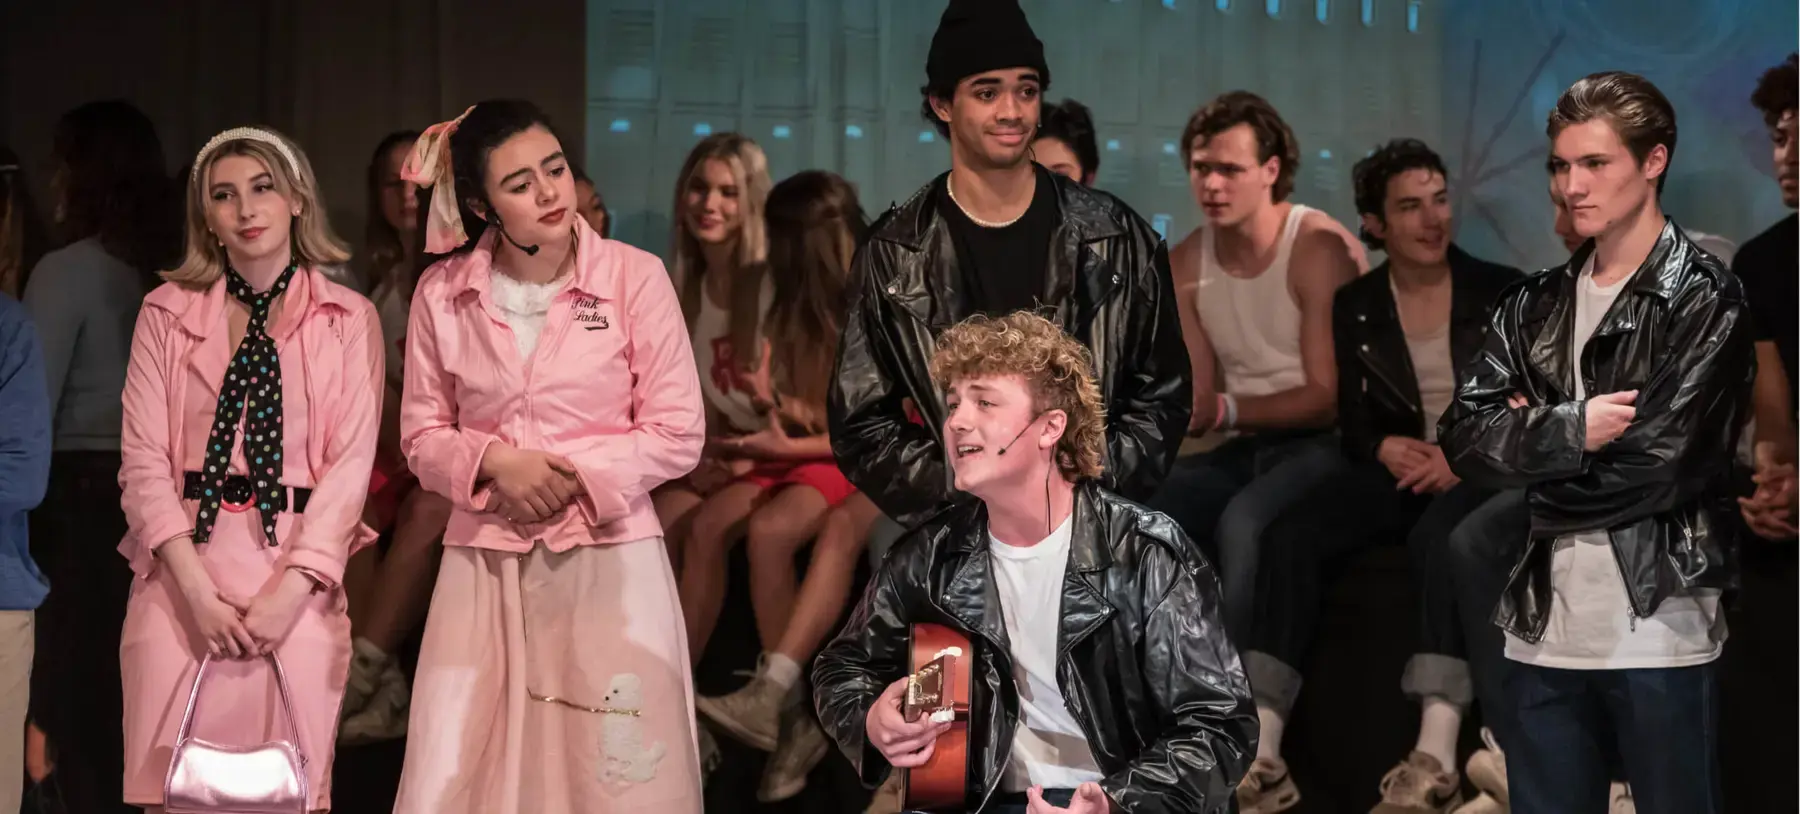 Porter-Gaud students performing Grease.